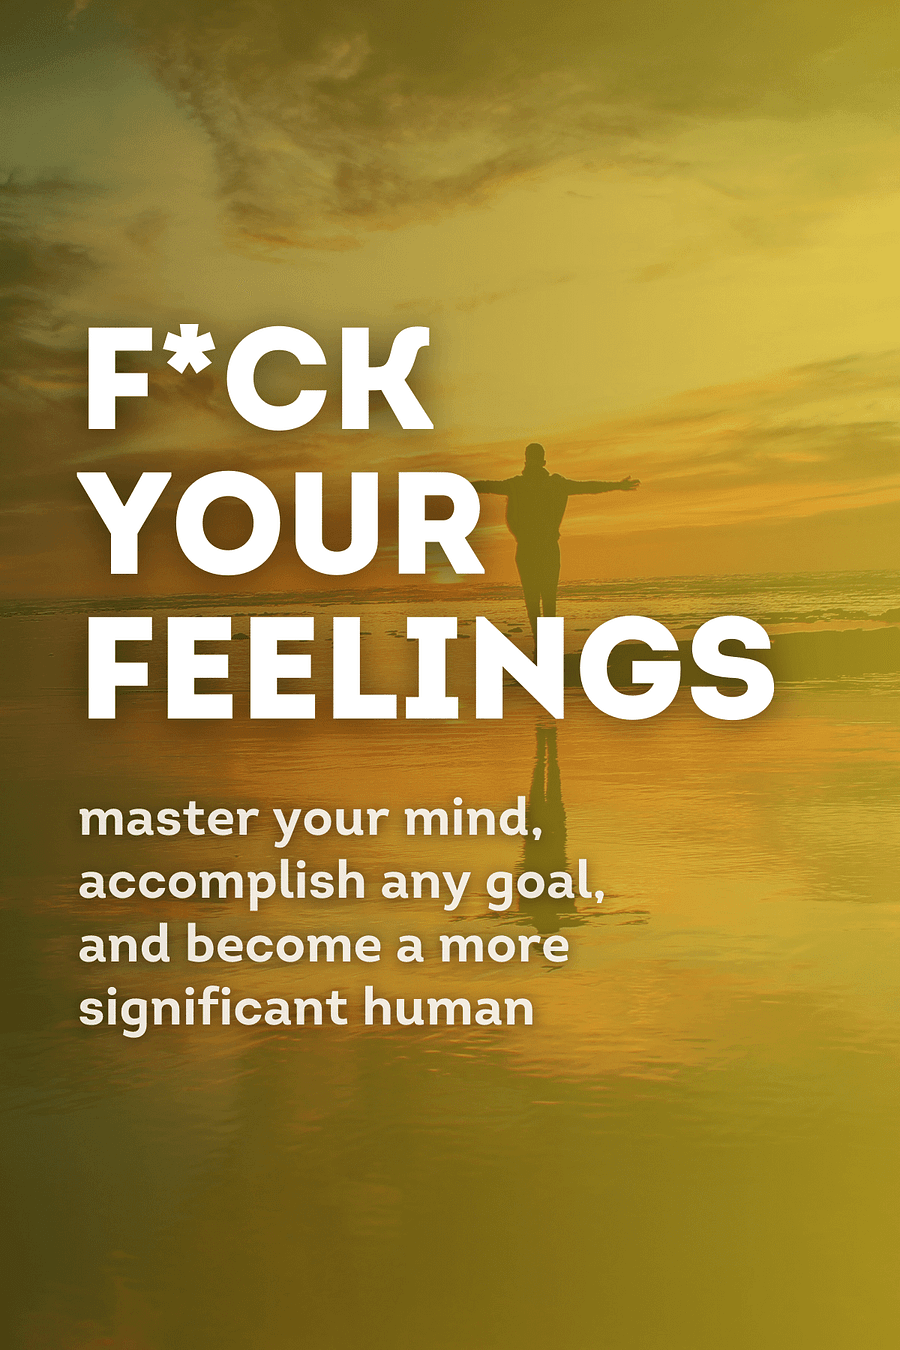 F*ck Your Feelings by Ryan Munsey - Book Summary